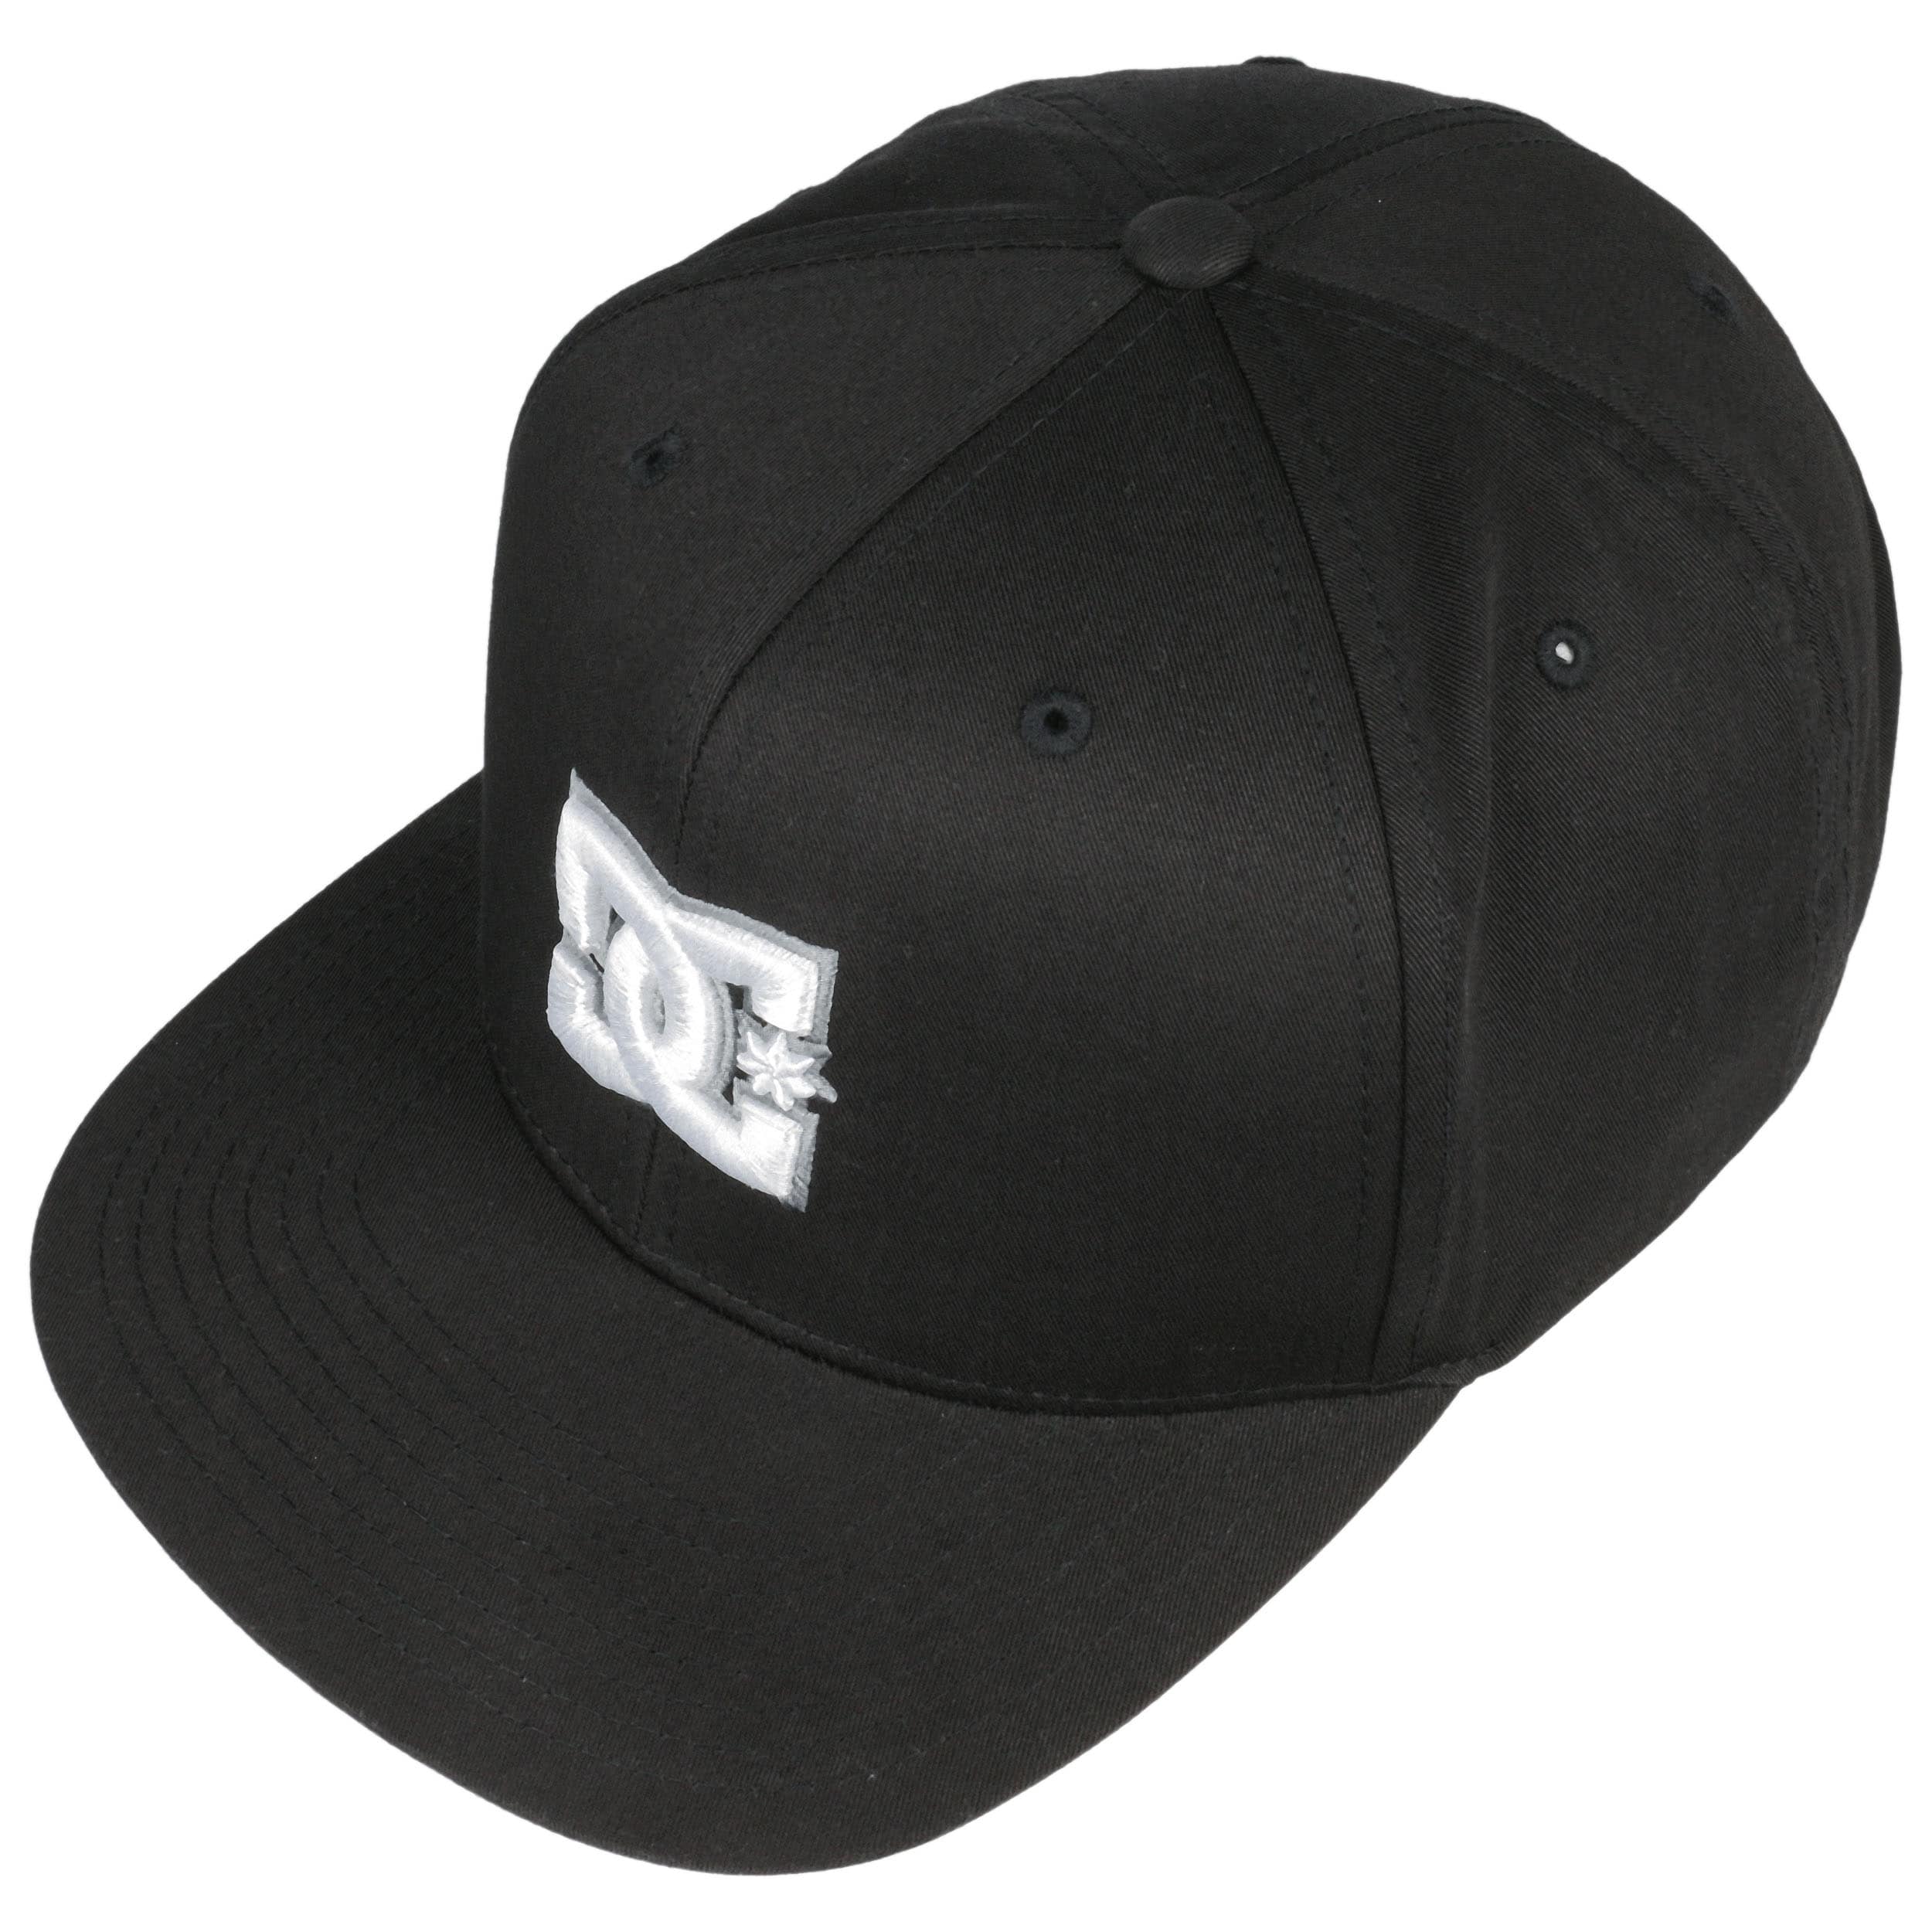 Snappy Snapback Cap by DC Shoes Co - 26,95 €